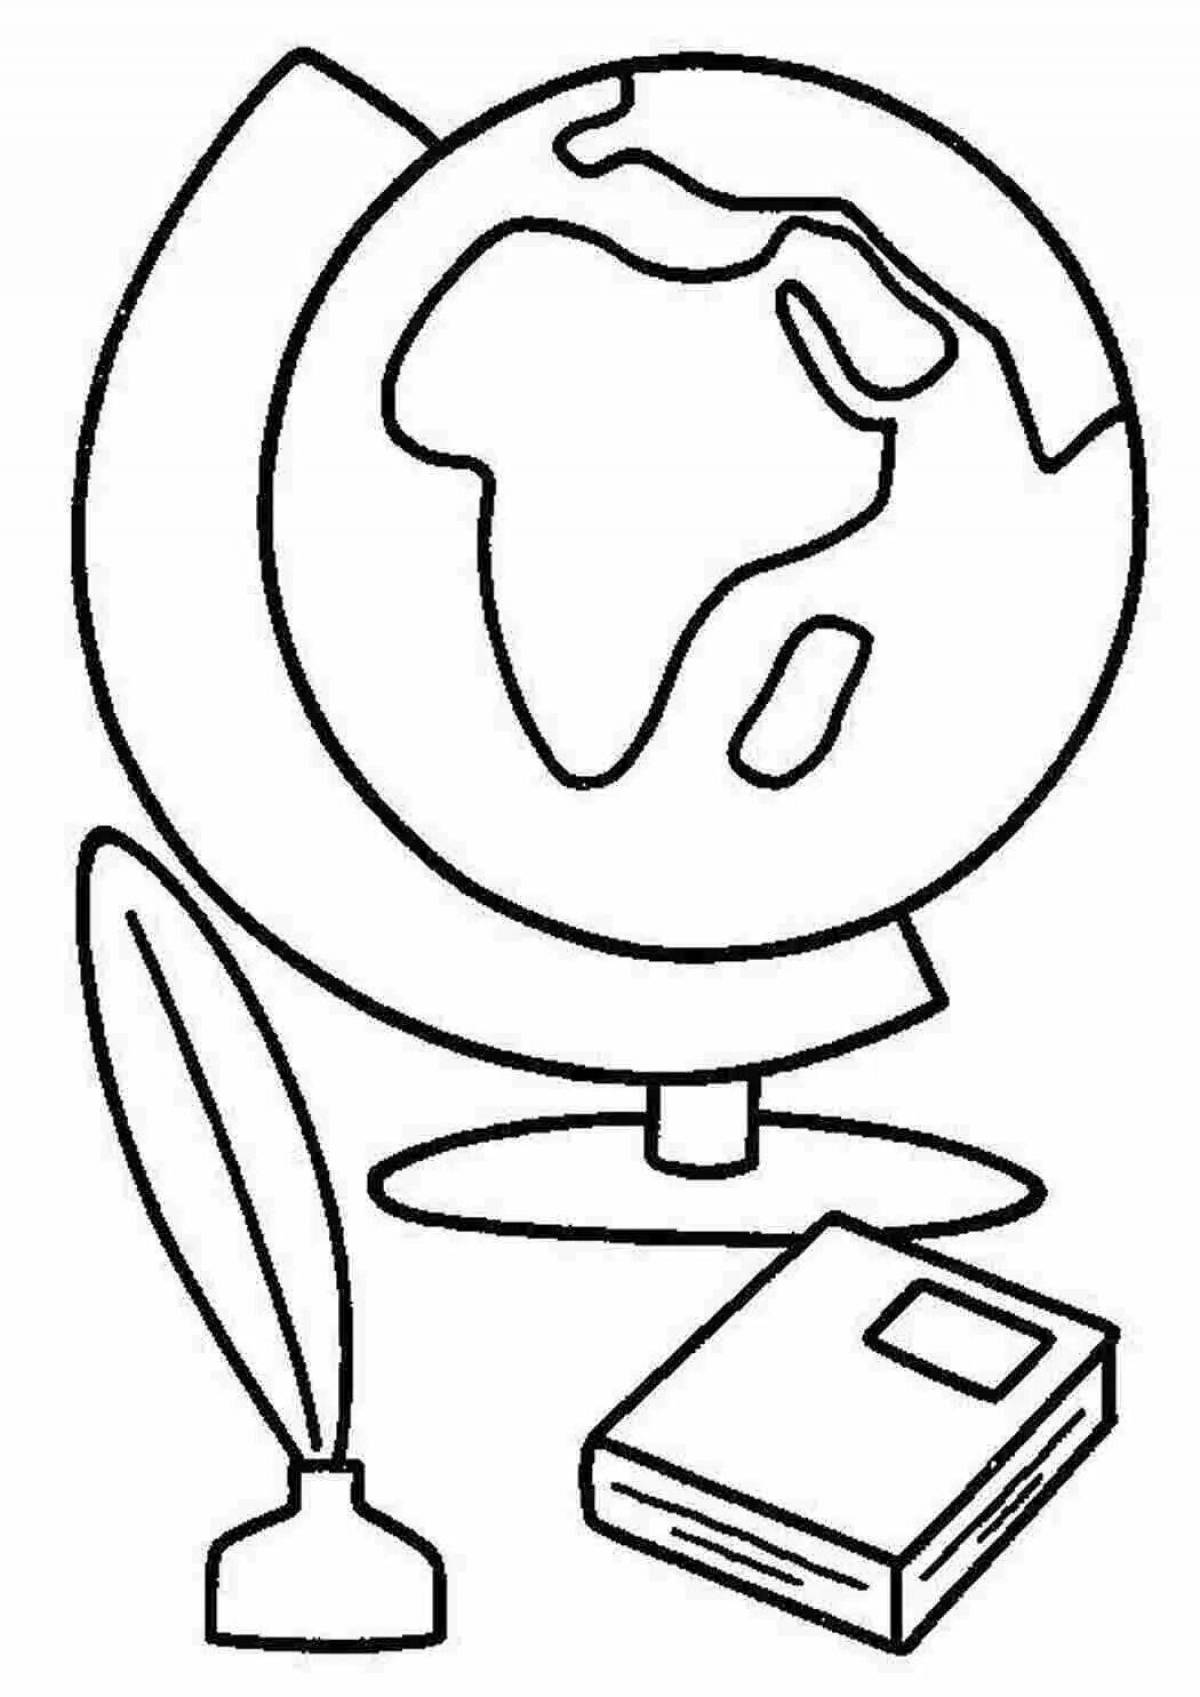 Playful students coloring page